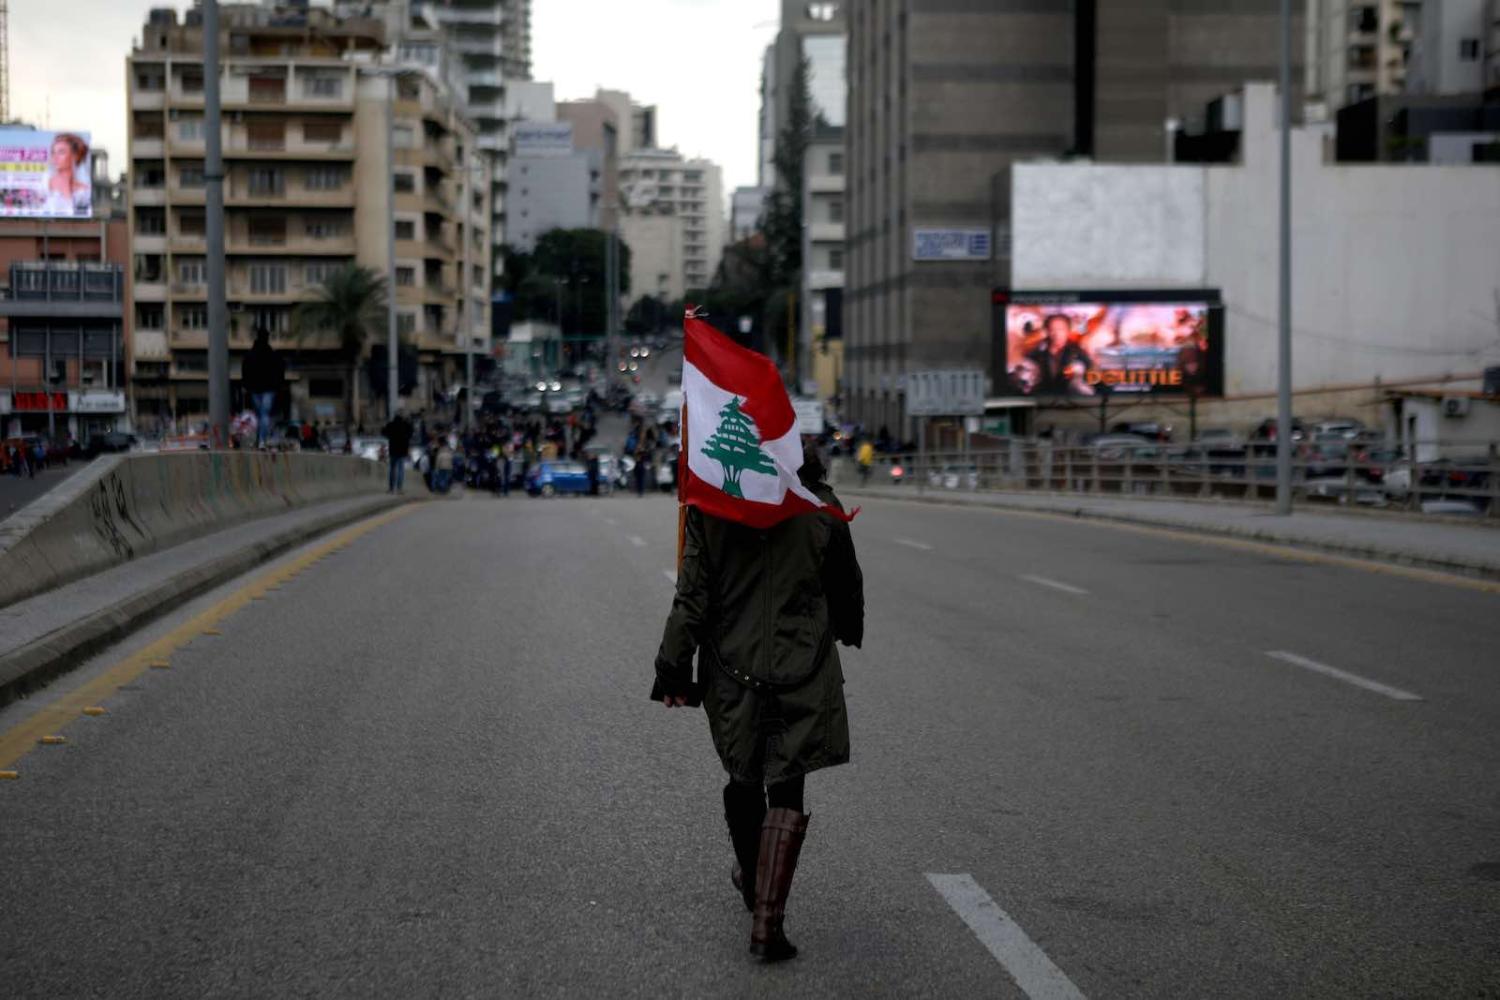 Protests in Lebanon continue against a political elite accused of corruption and incompetence (Patrick Baz/AFP/Getty Images)